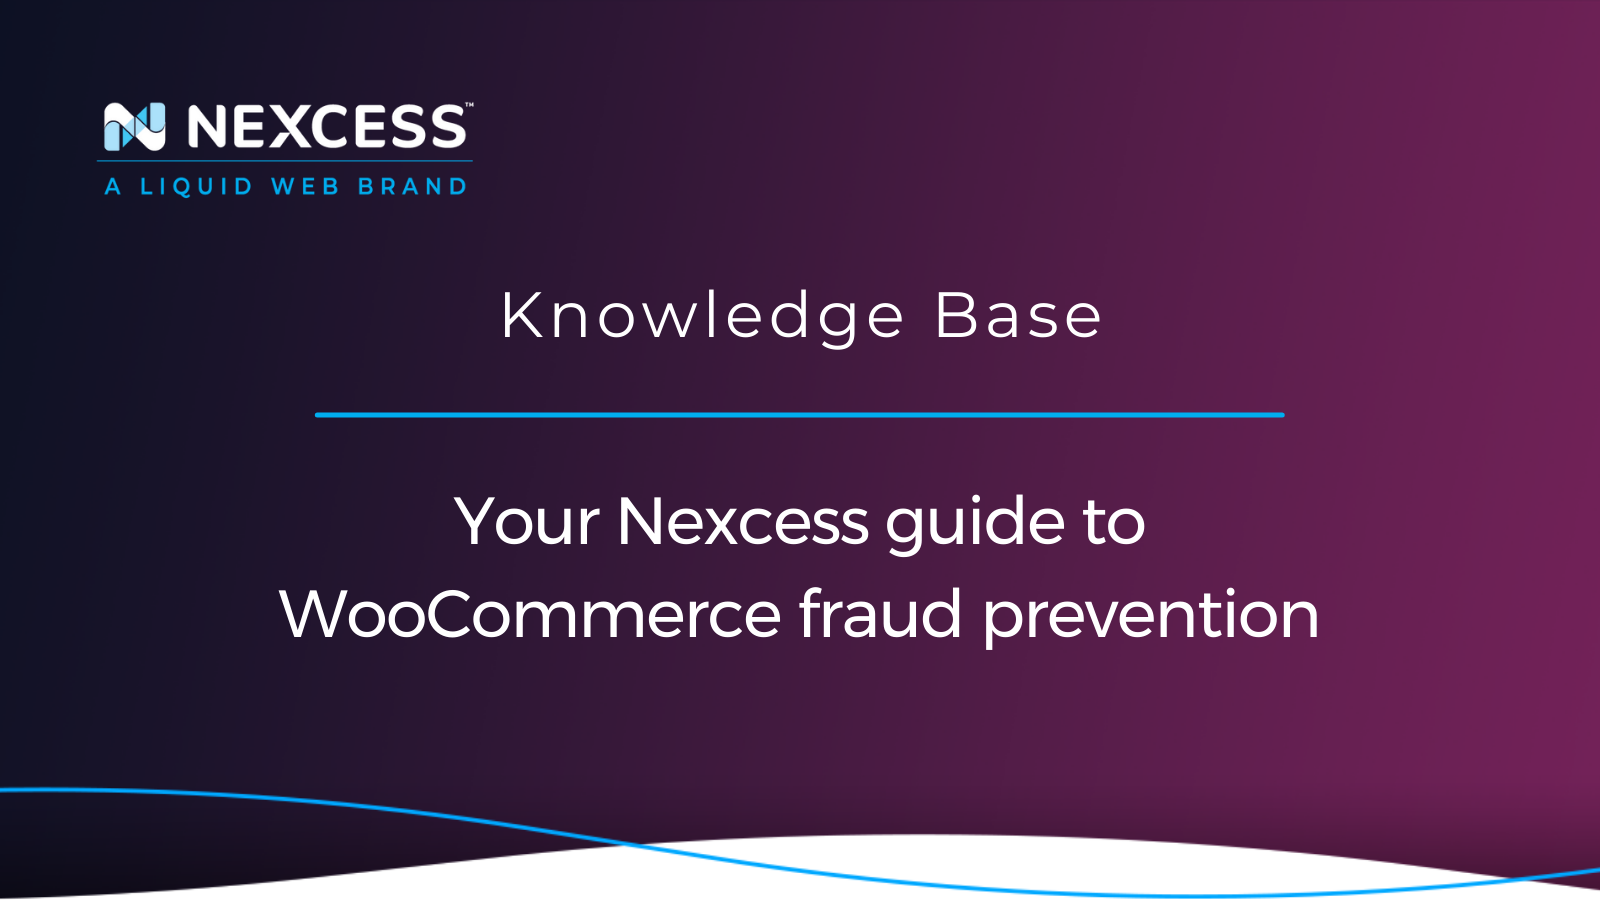 Your Nexcess guide to WooCommerce fraud prevention